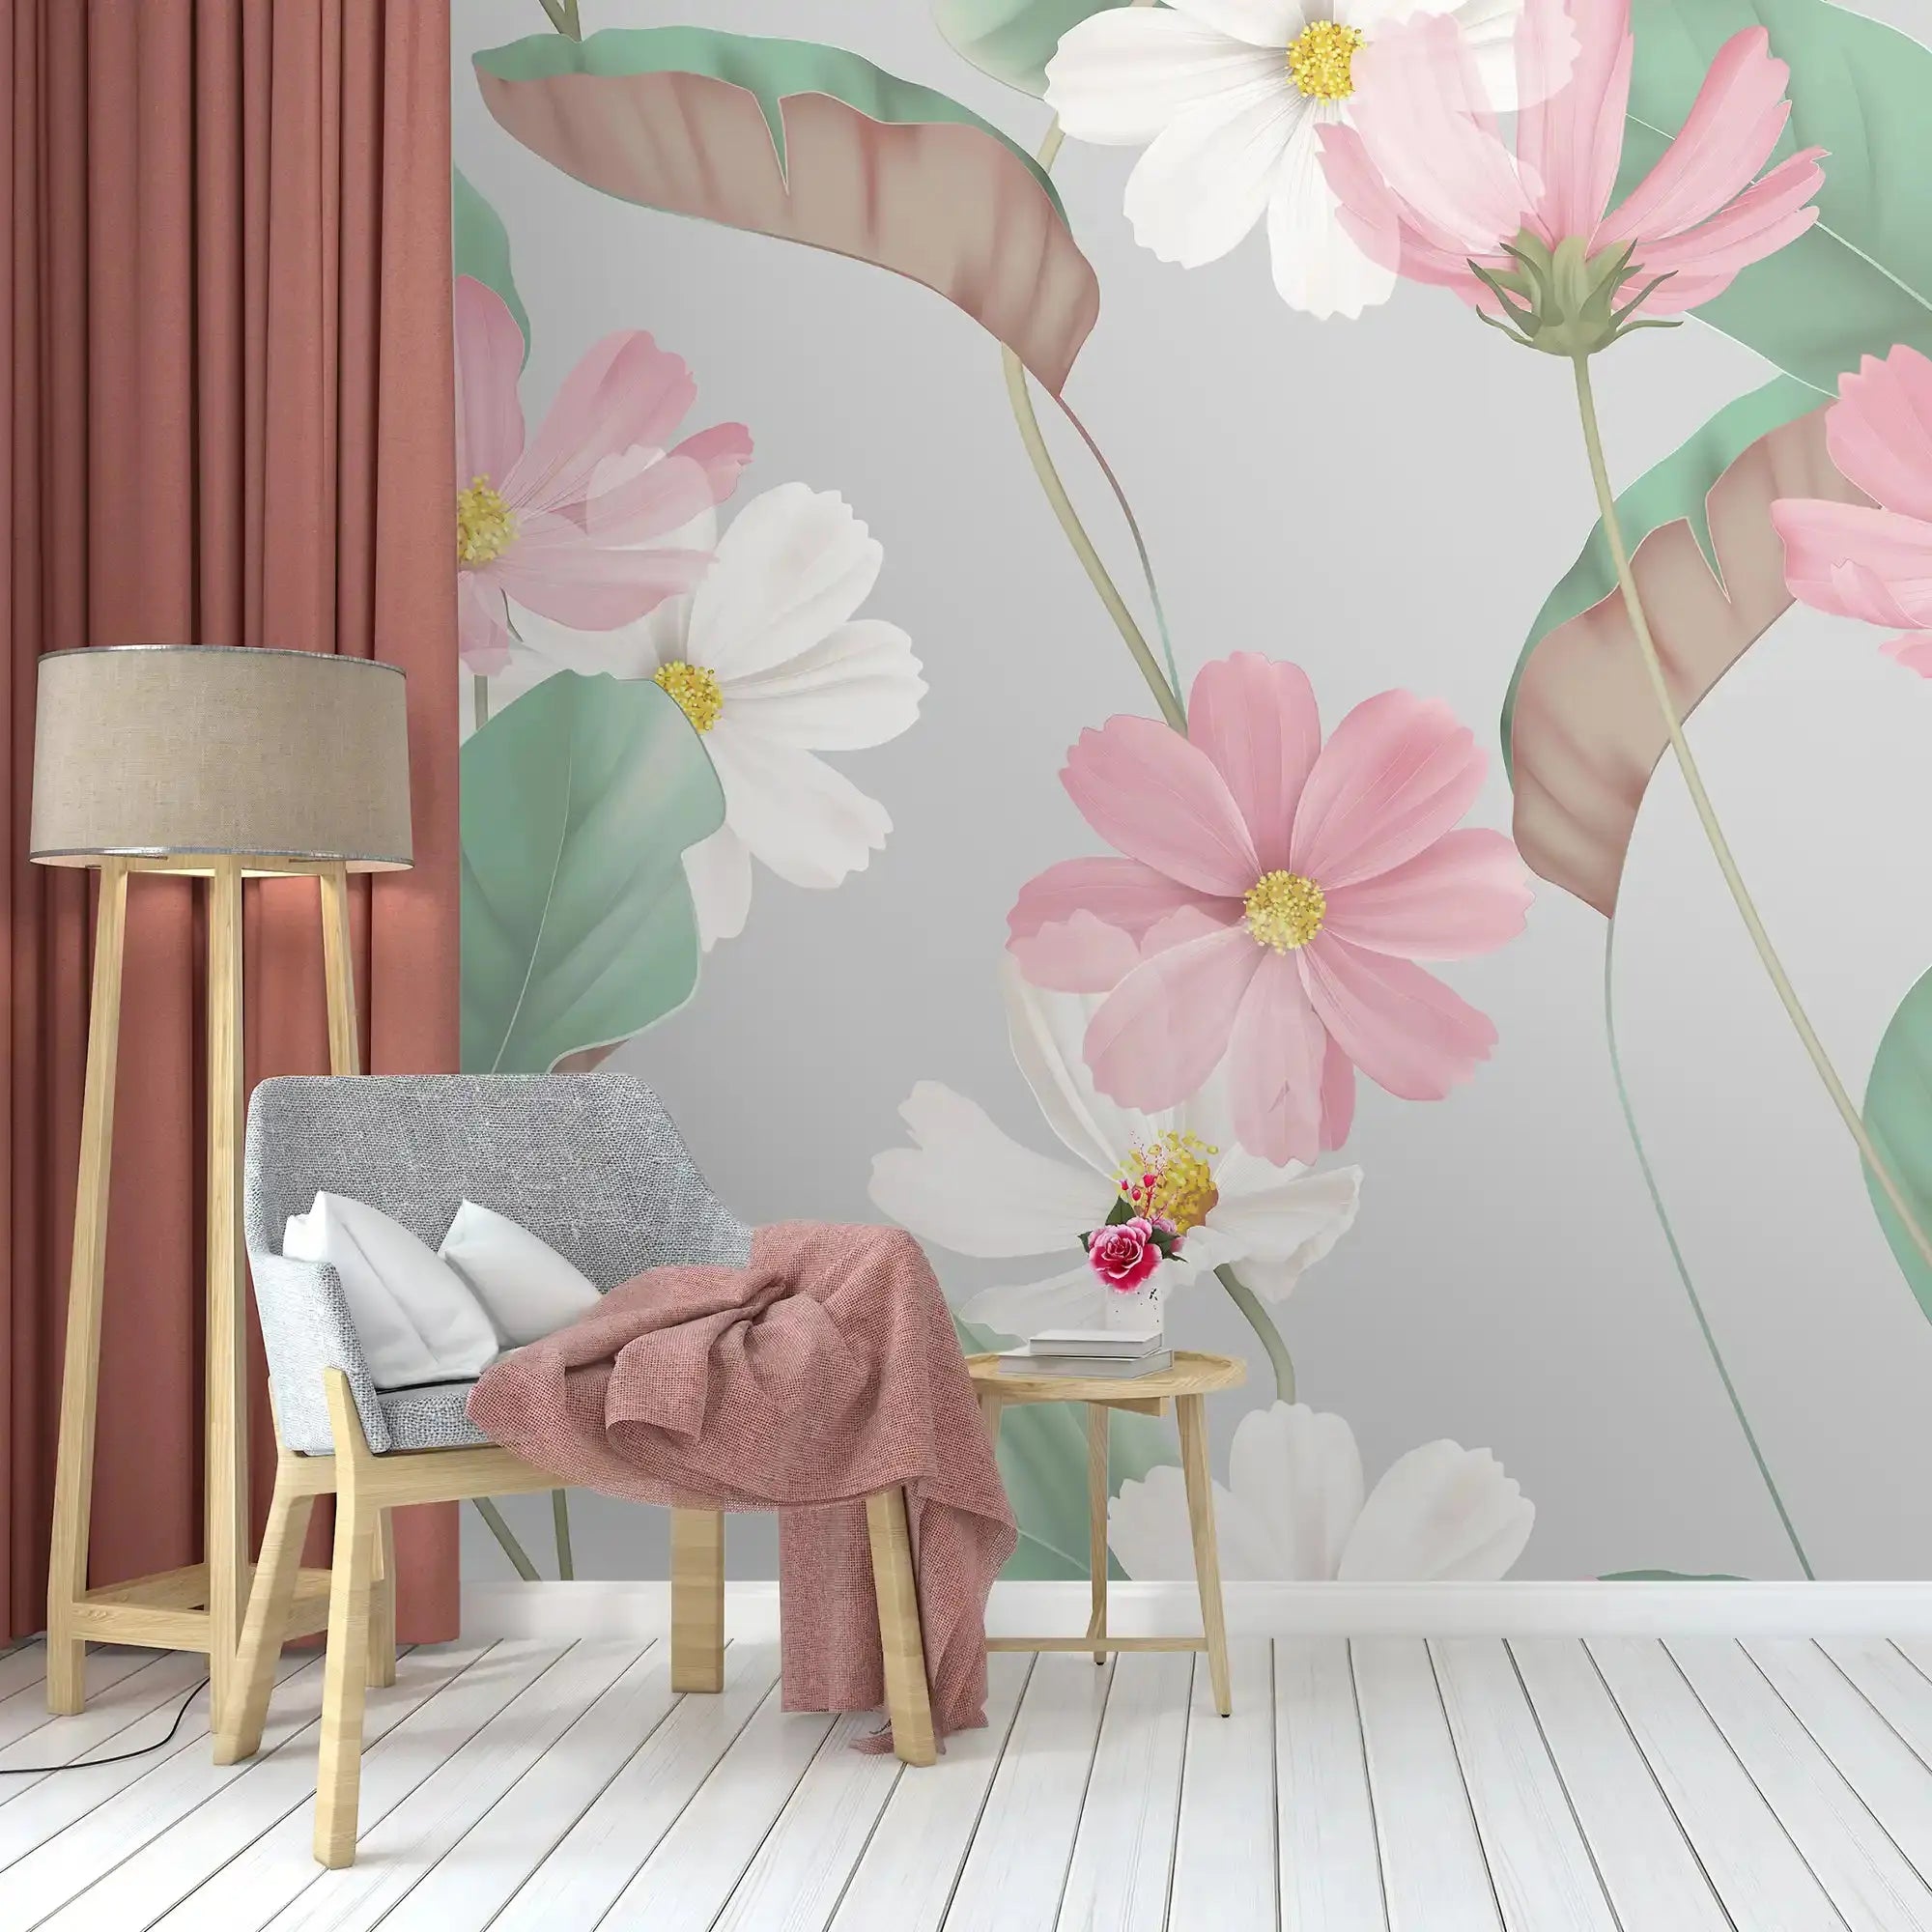 3080-D / Vibrant Boho Floral Wallpaper: Peel and Stick for Easy Application - Self Adhesive, Temporary Wall Mural for DIY Decor - Artevella